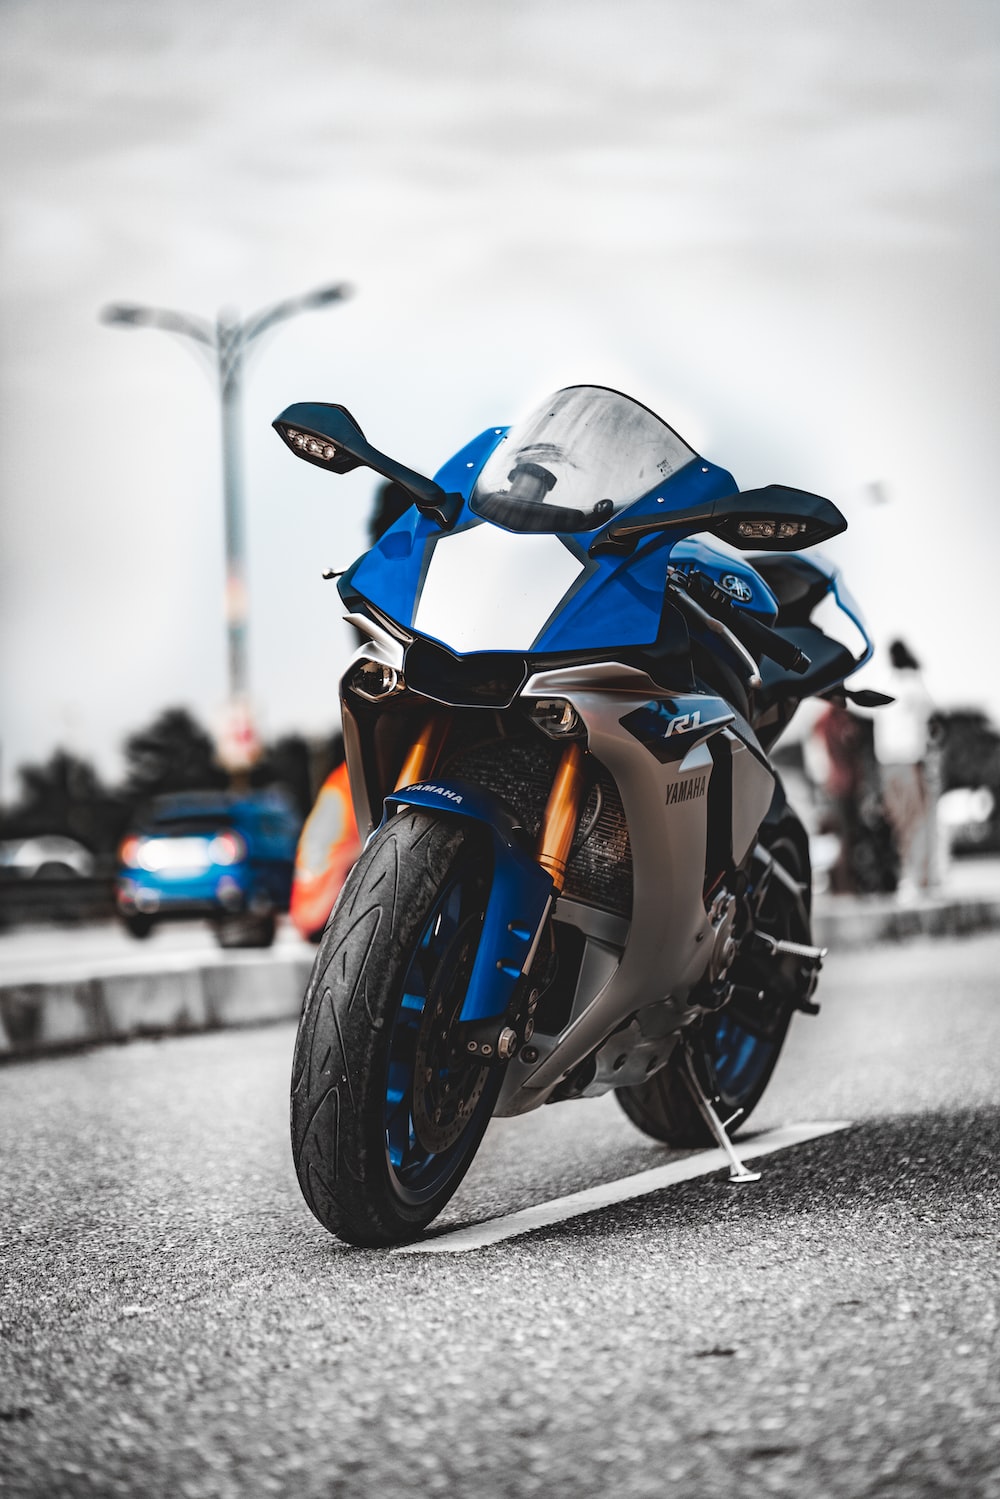 New Model Bikes Images , Bikes New Mobile Wallpapers